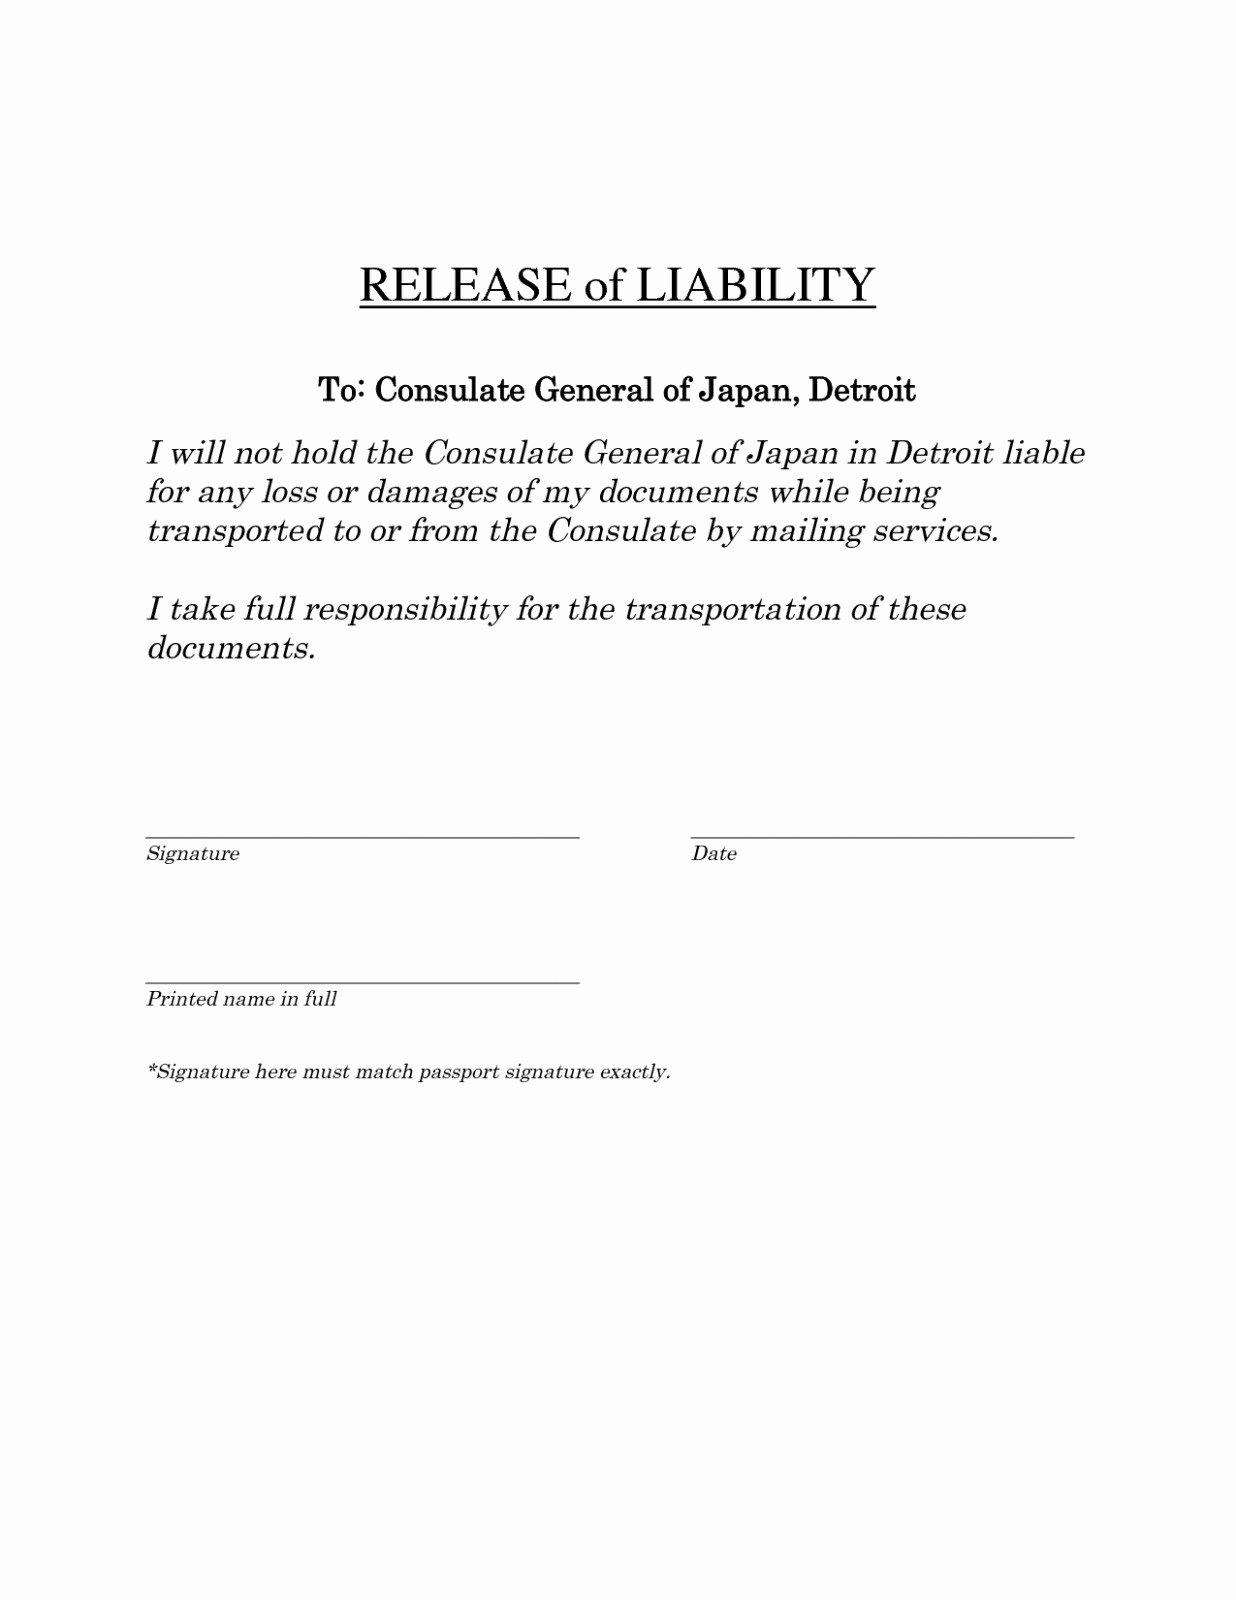 General Release form Template Best Of General Waiver Liability form Image – General Release Of